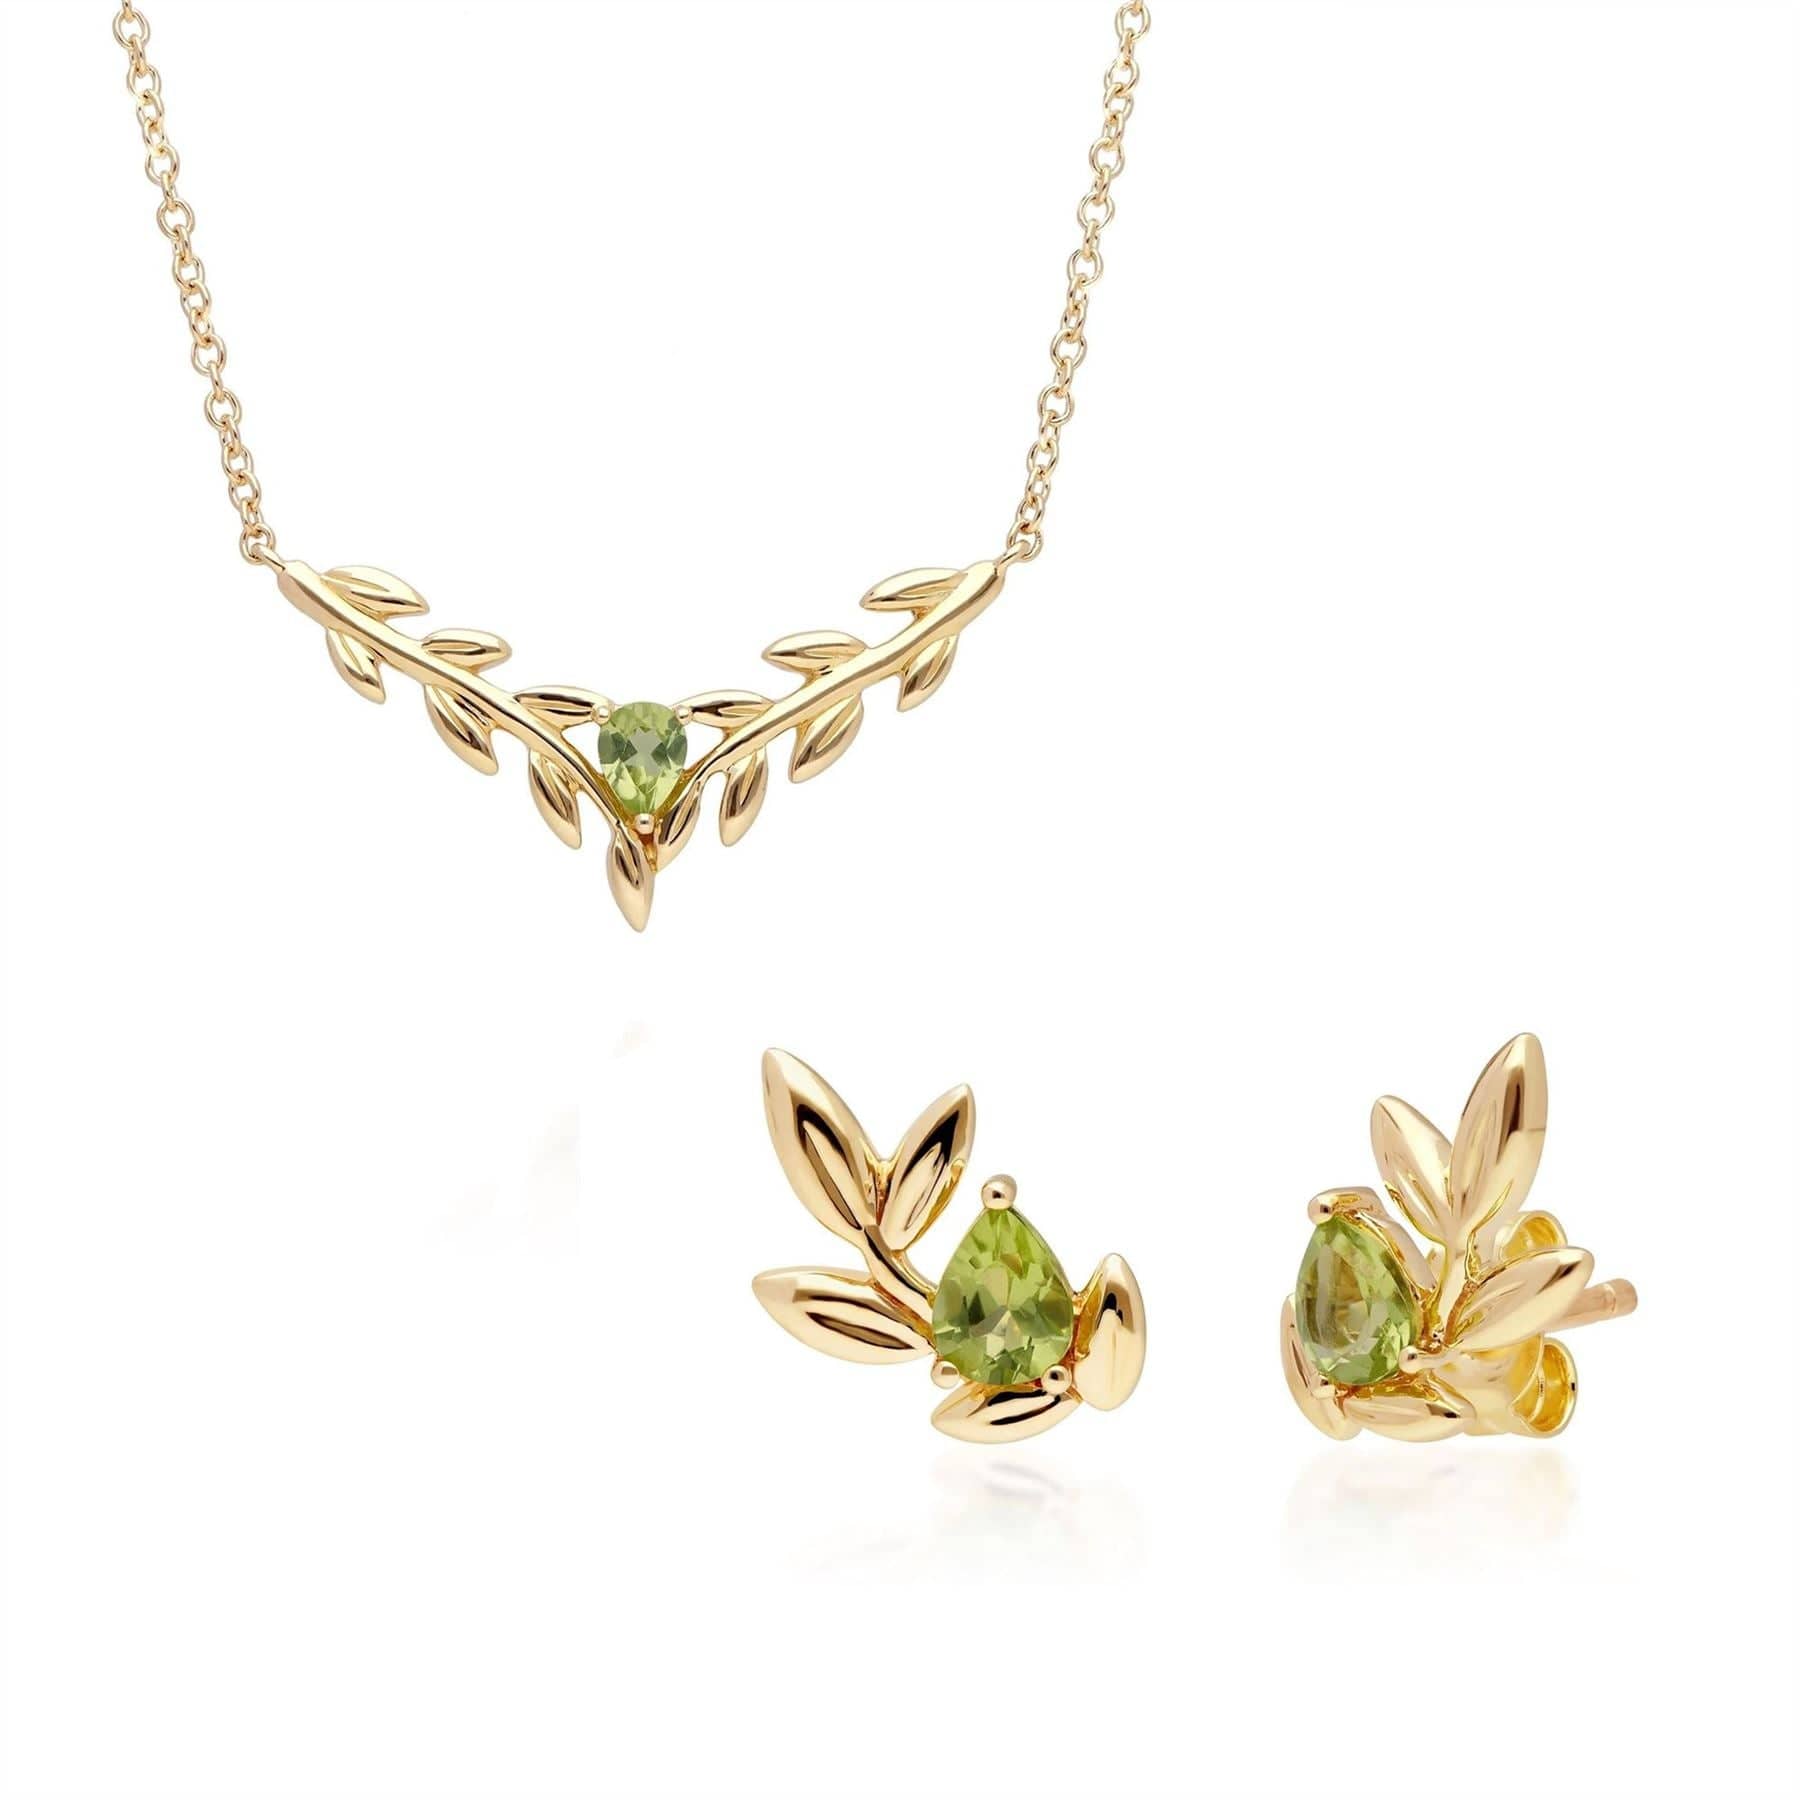 135N0366019-135E1674019 O Leaf Peridot Necklace & Stud Earring Set in 9ct Yellow Gold 1